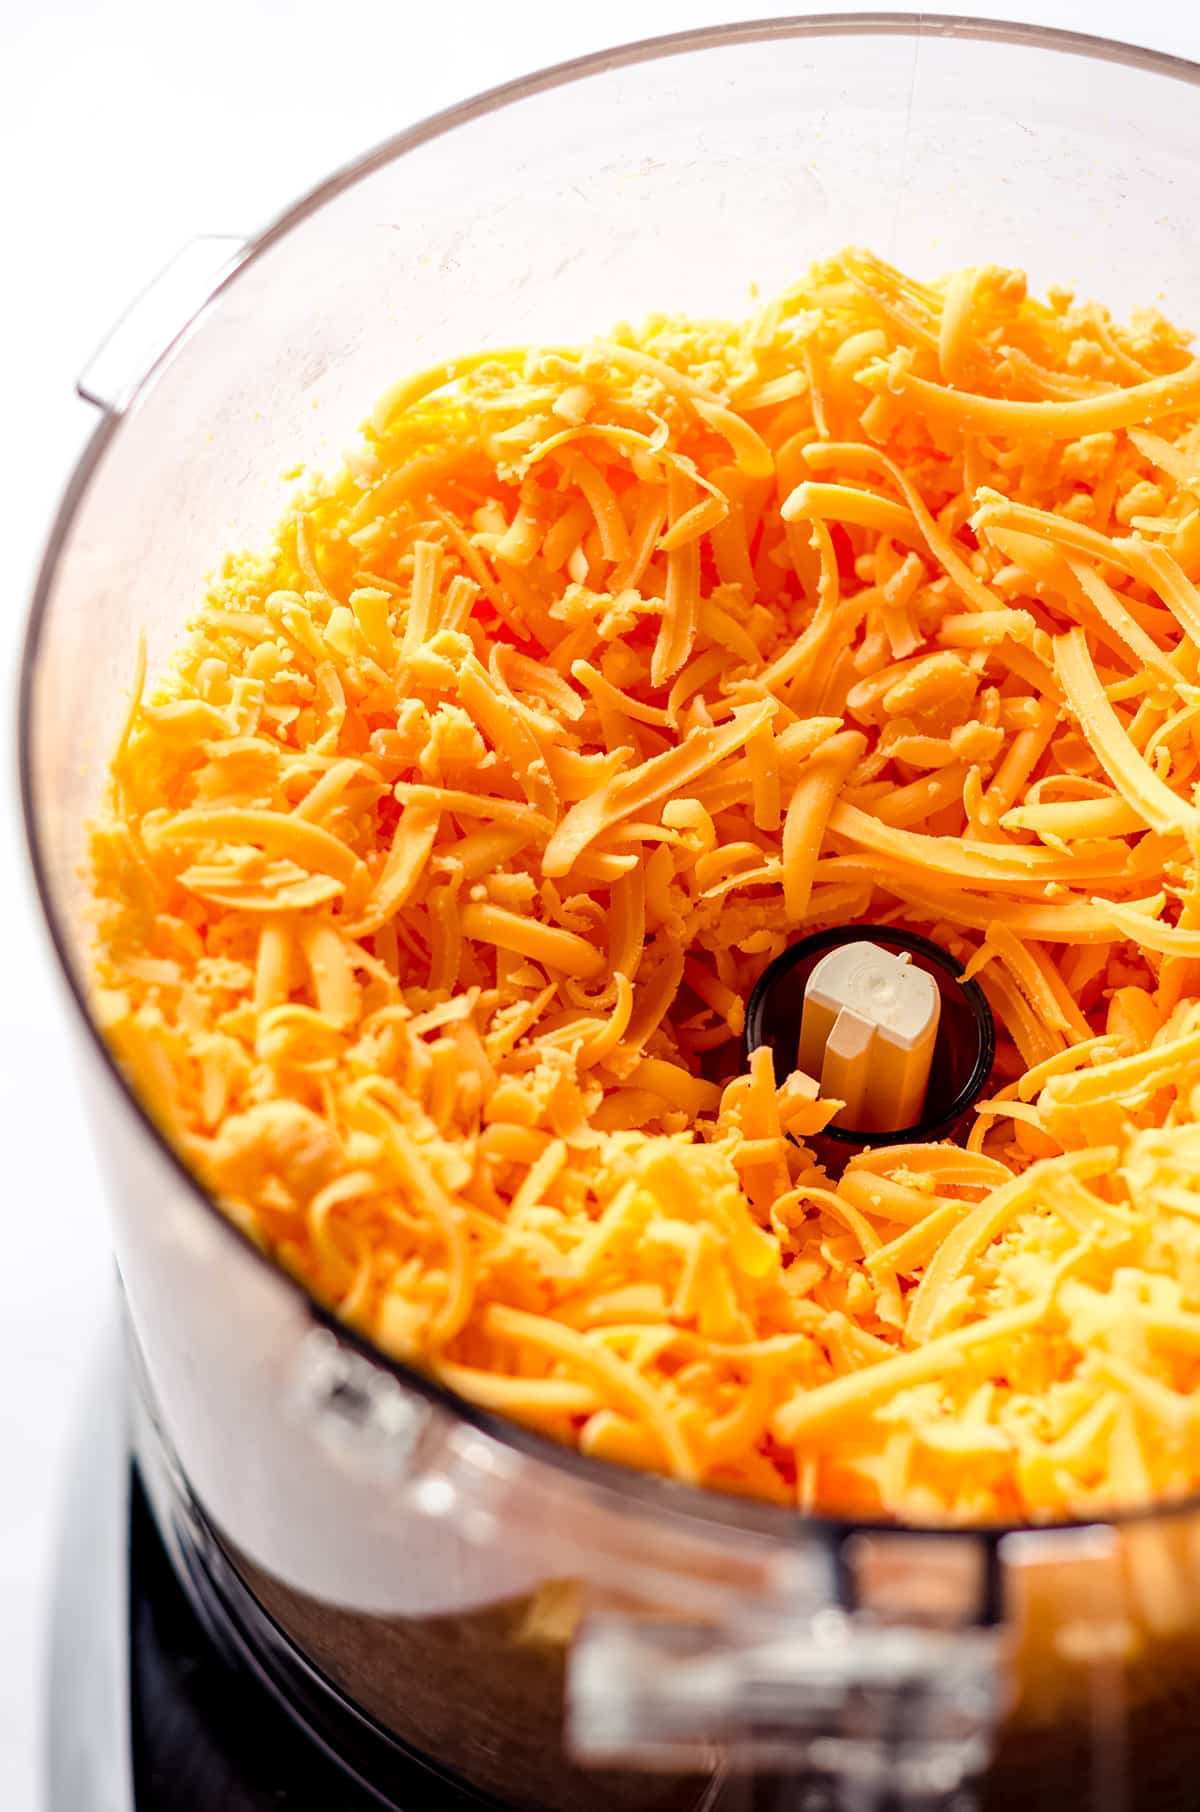 A food processor filled with finely shredded cheese.